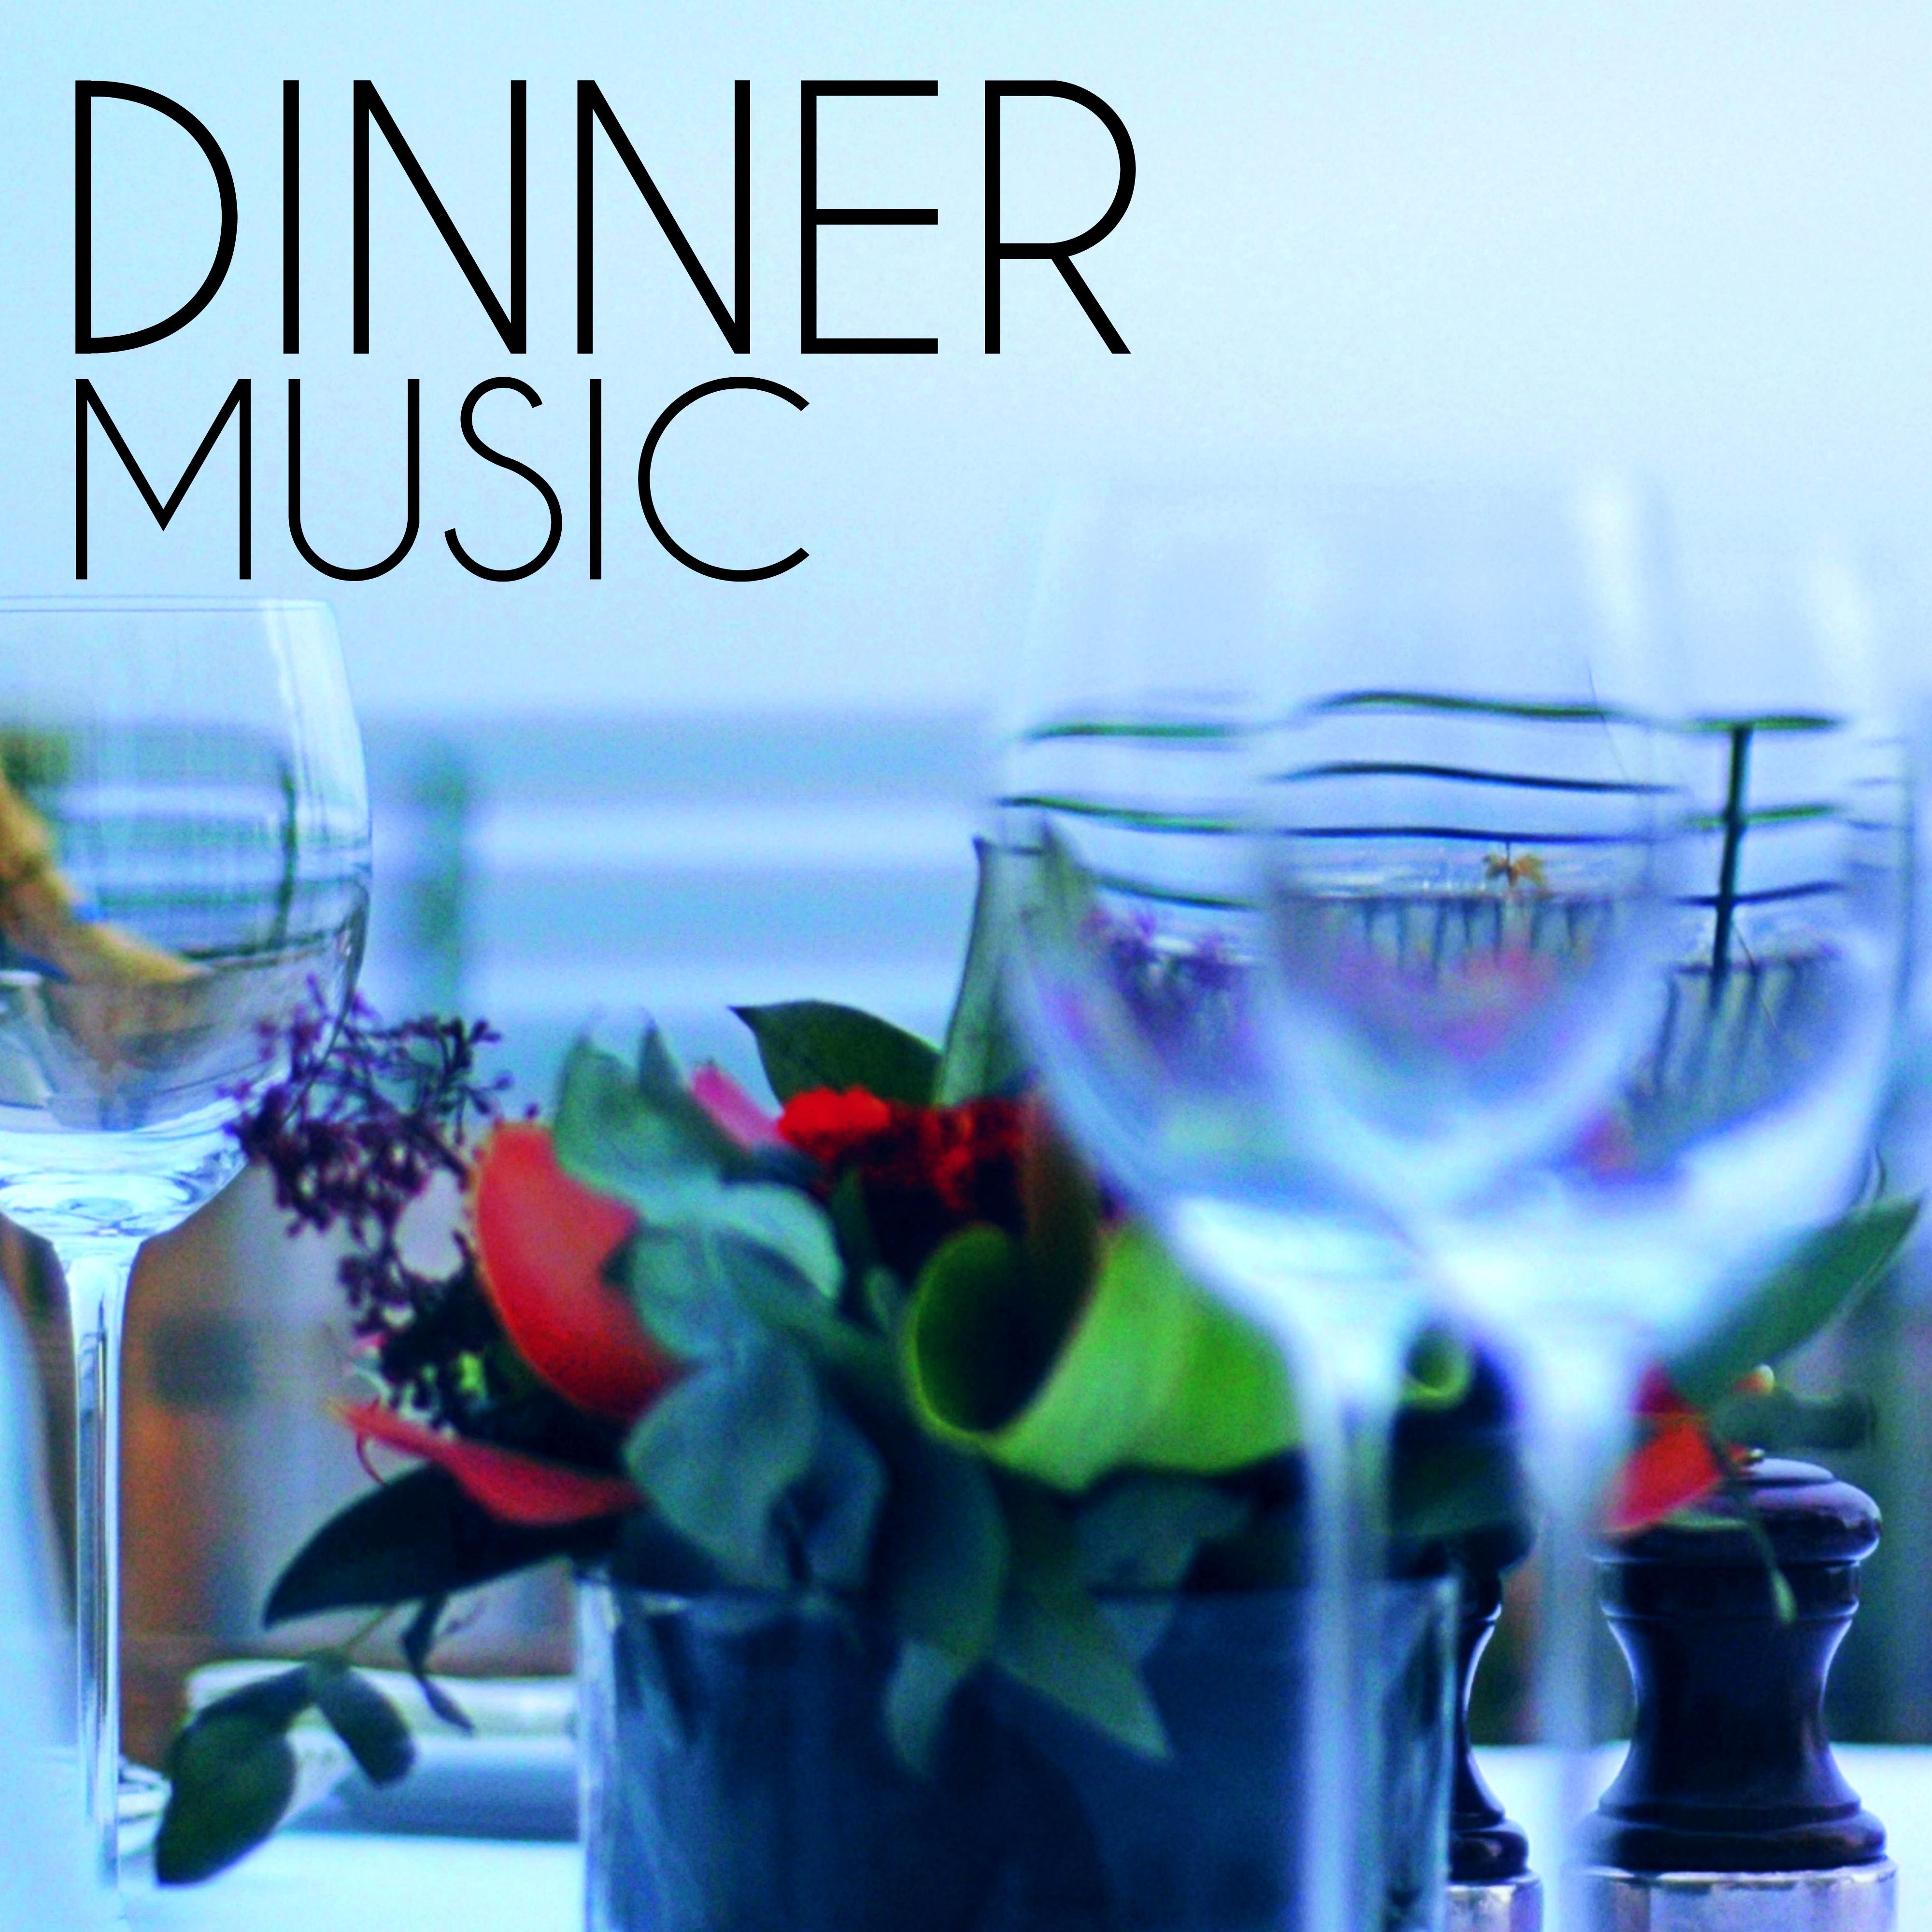 Dinner Music  Big Band Jazz Instrumental, Smooth Jazz  Lounge Music for Cocktail, Drinks and Dinner